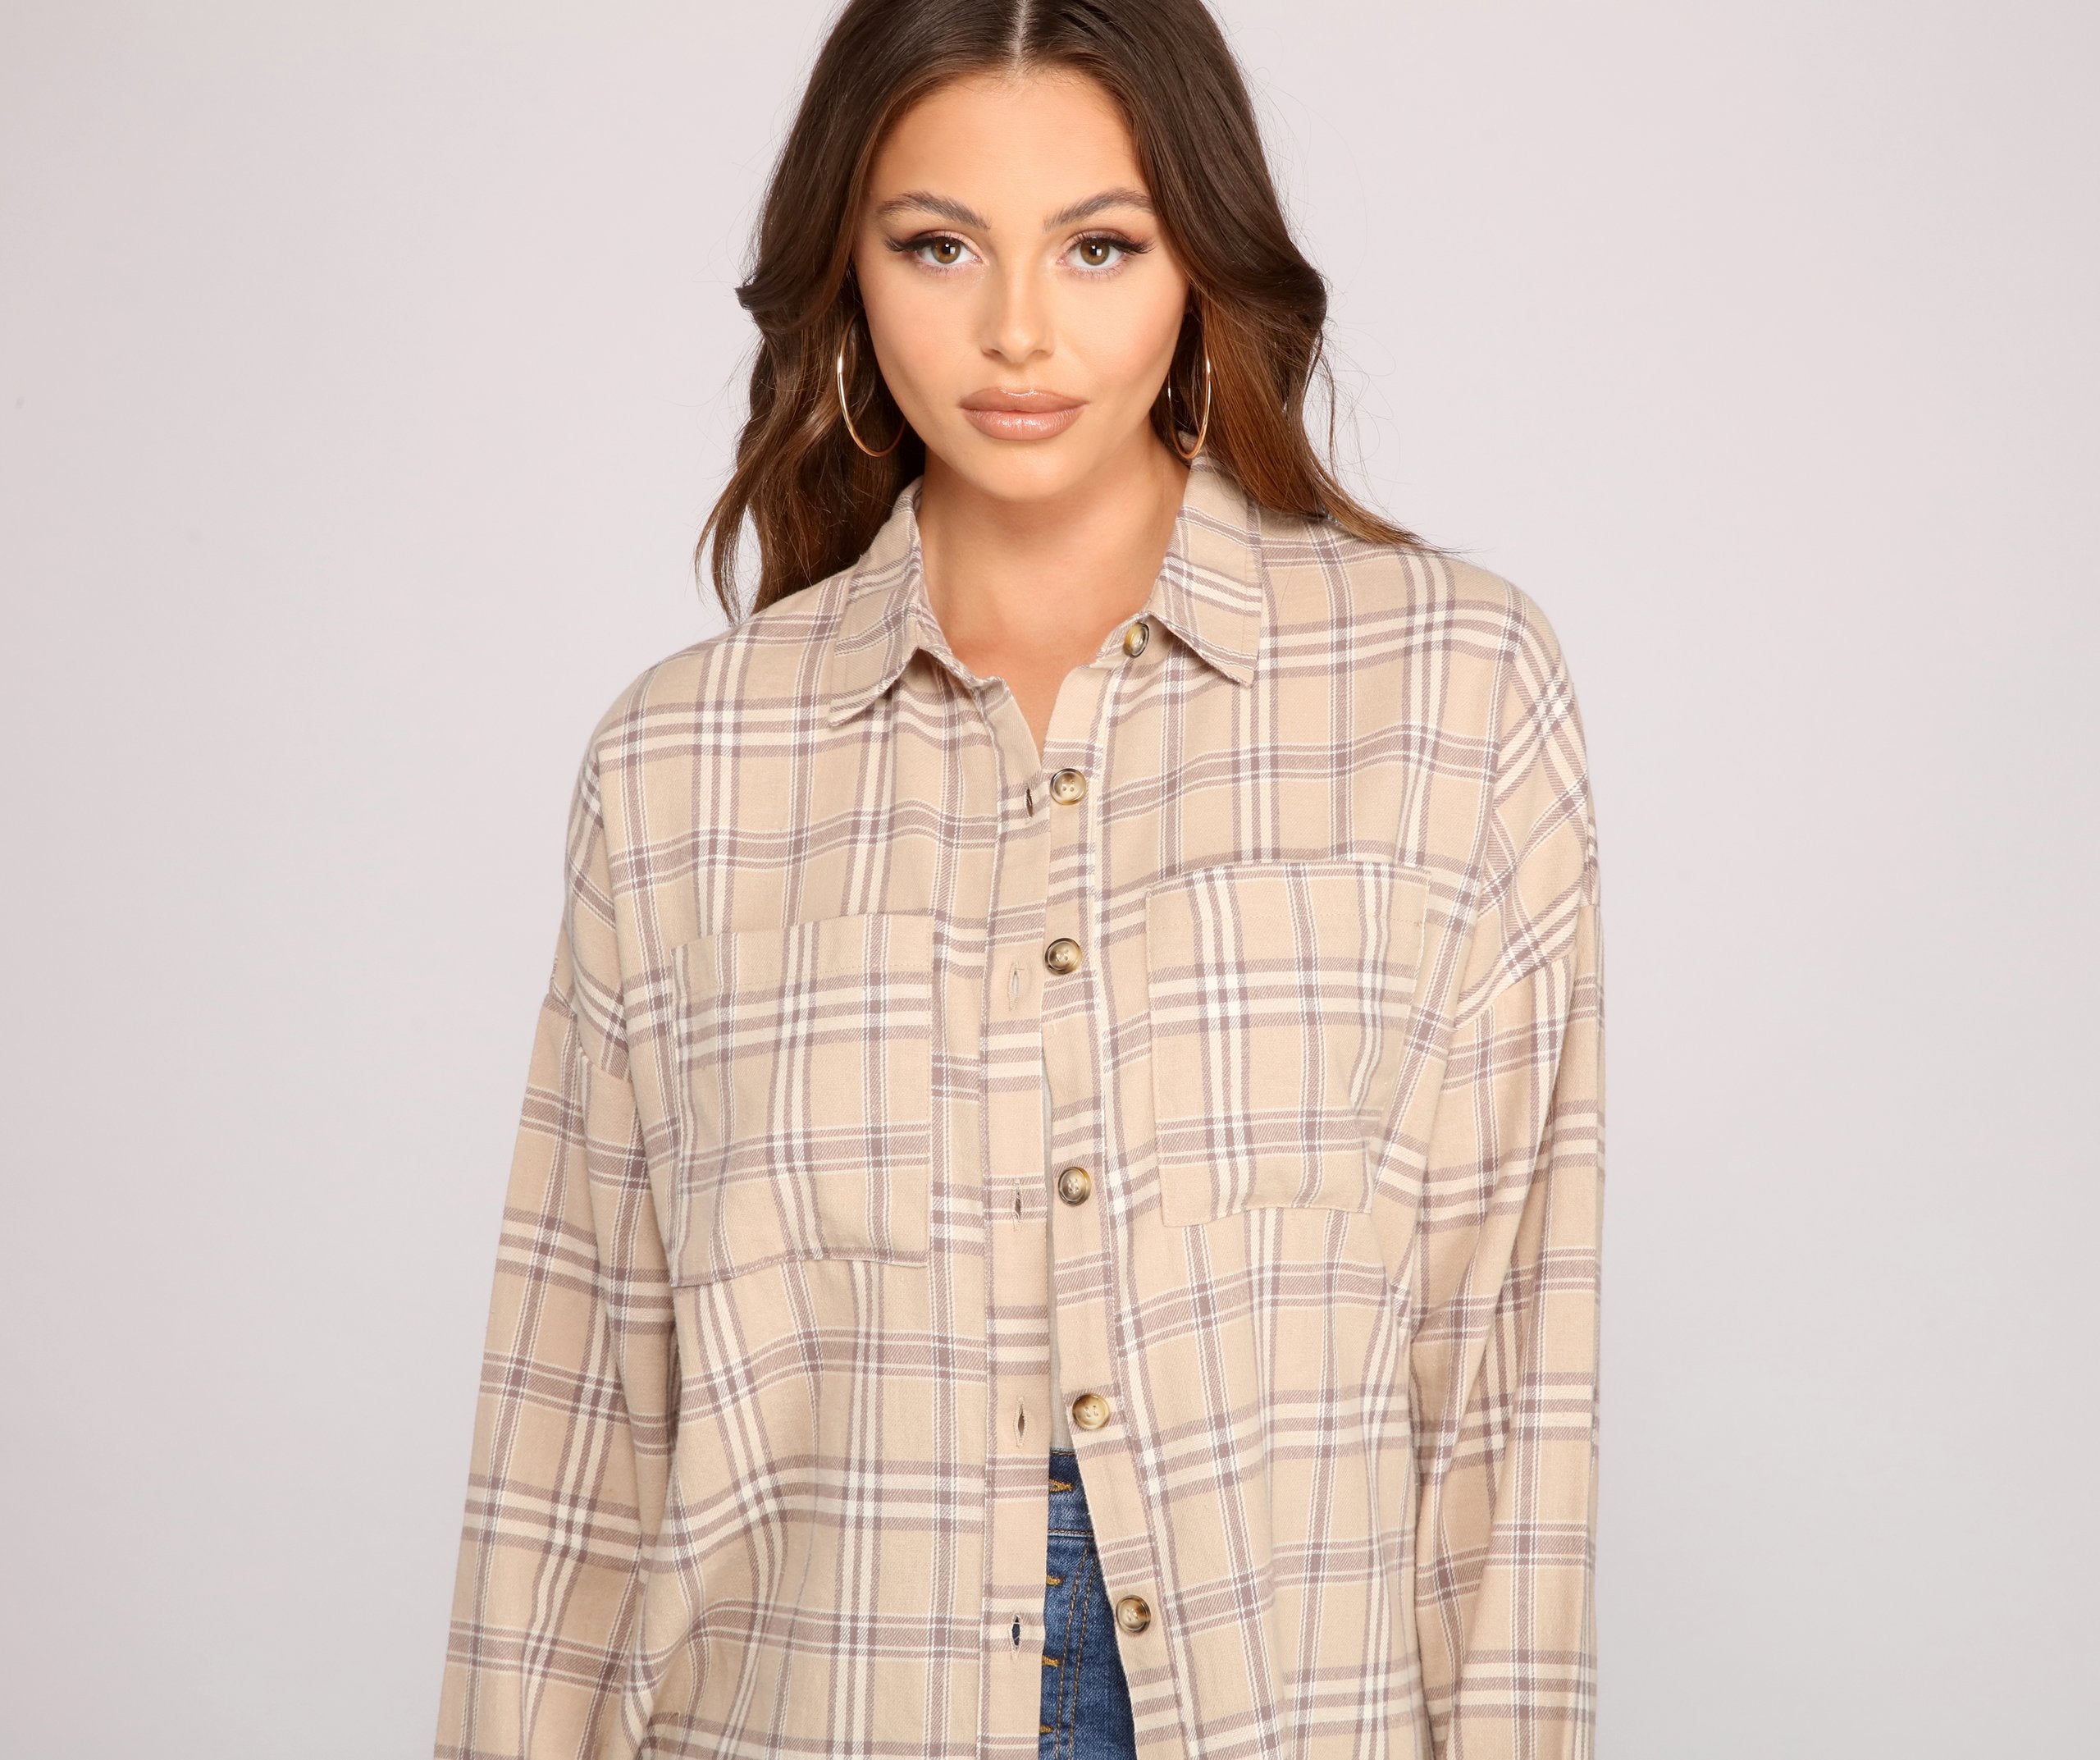 Button Up In Fab Flannel Top